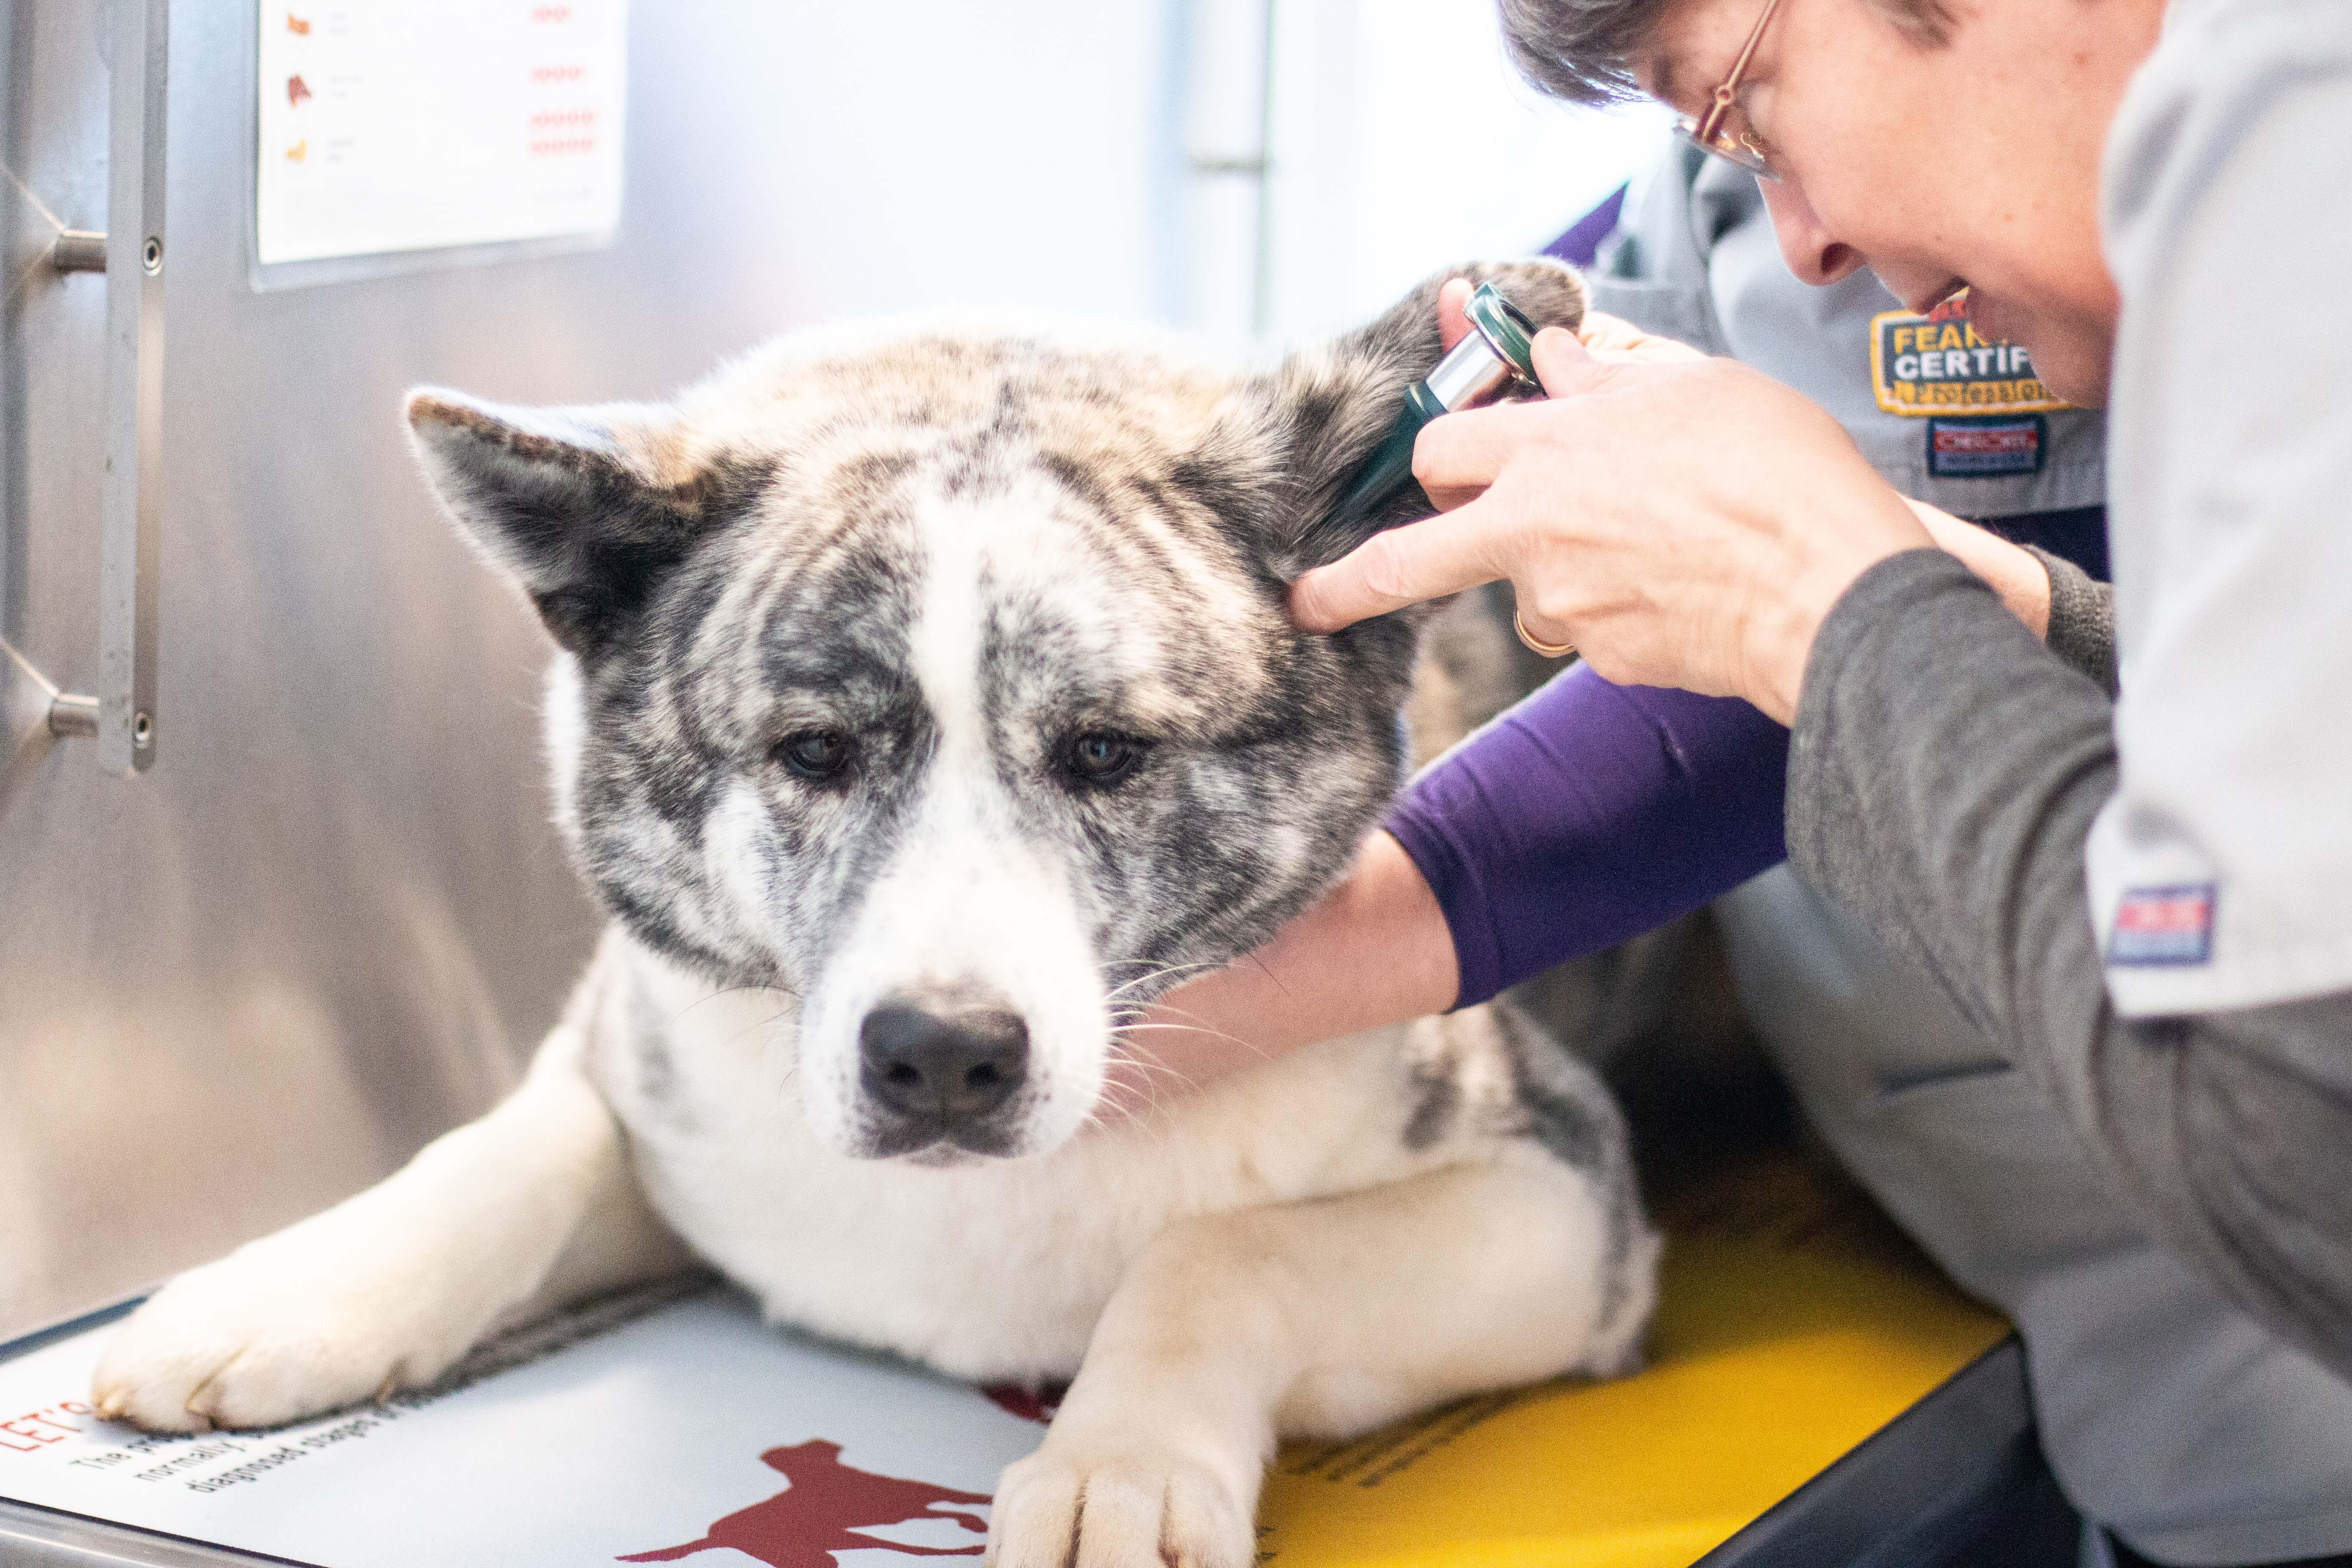 Part of our patients wellness exam is to check the ears, and this adorable pooch was a great patient for Dr. Kim Langholz as she conducted the ear exam.